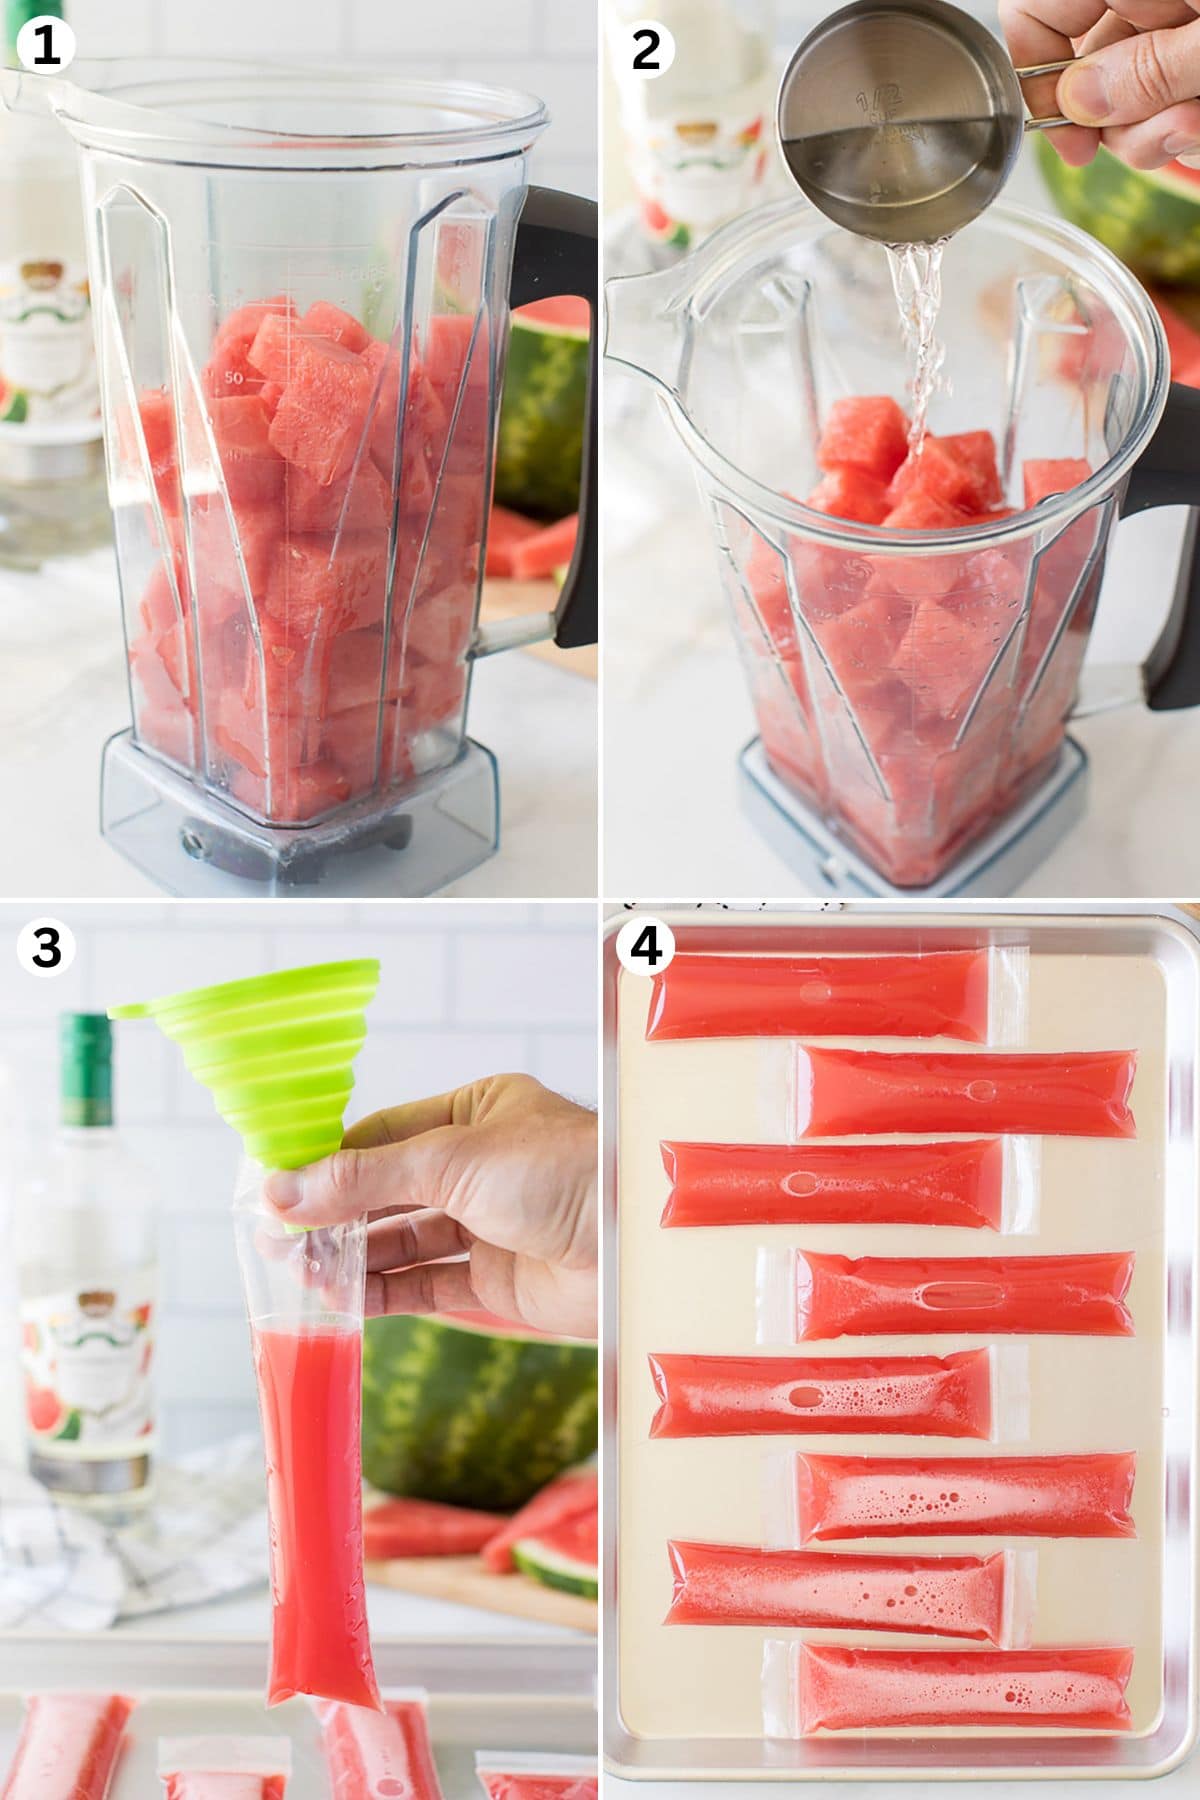 mix ingredients in blender. pour into freezer bags and place in freezer.